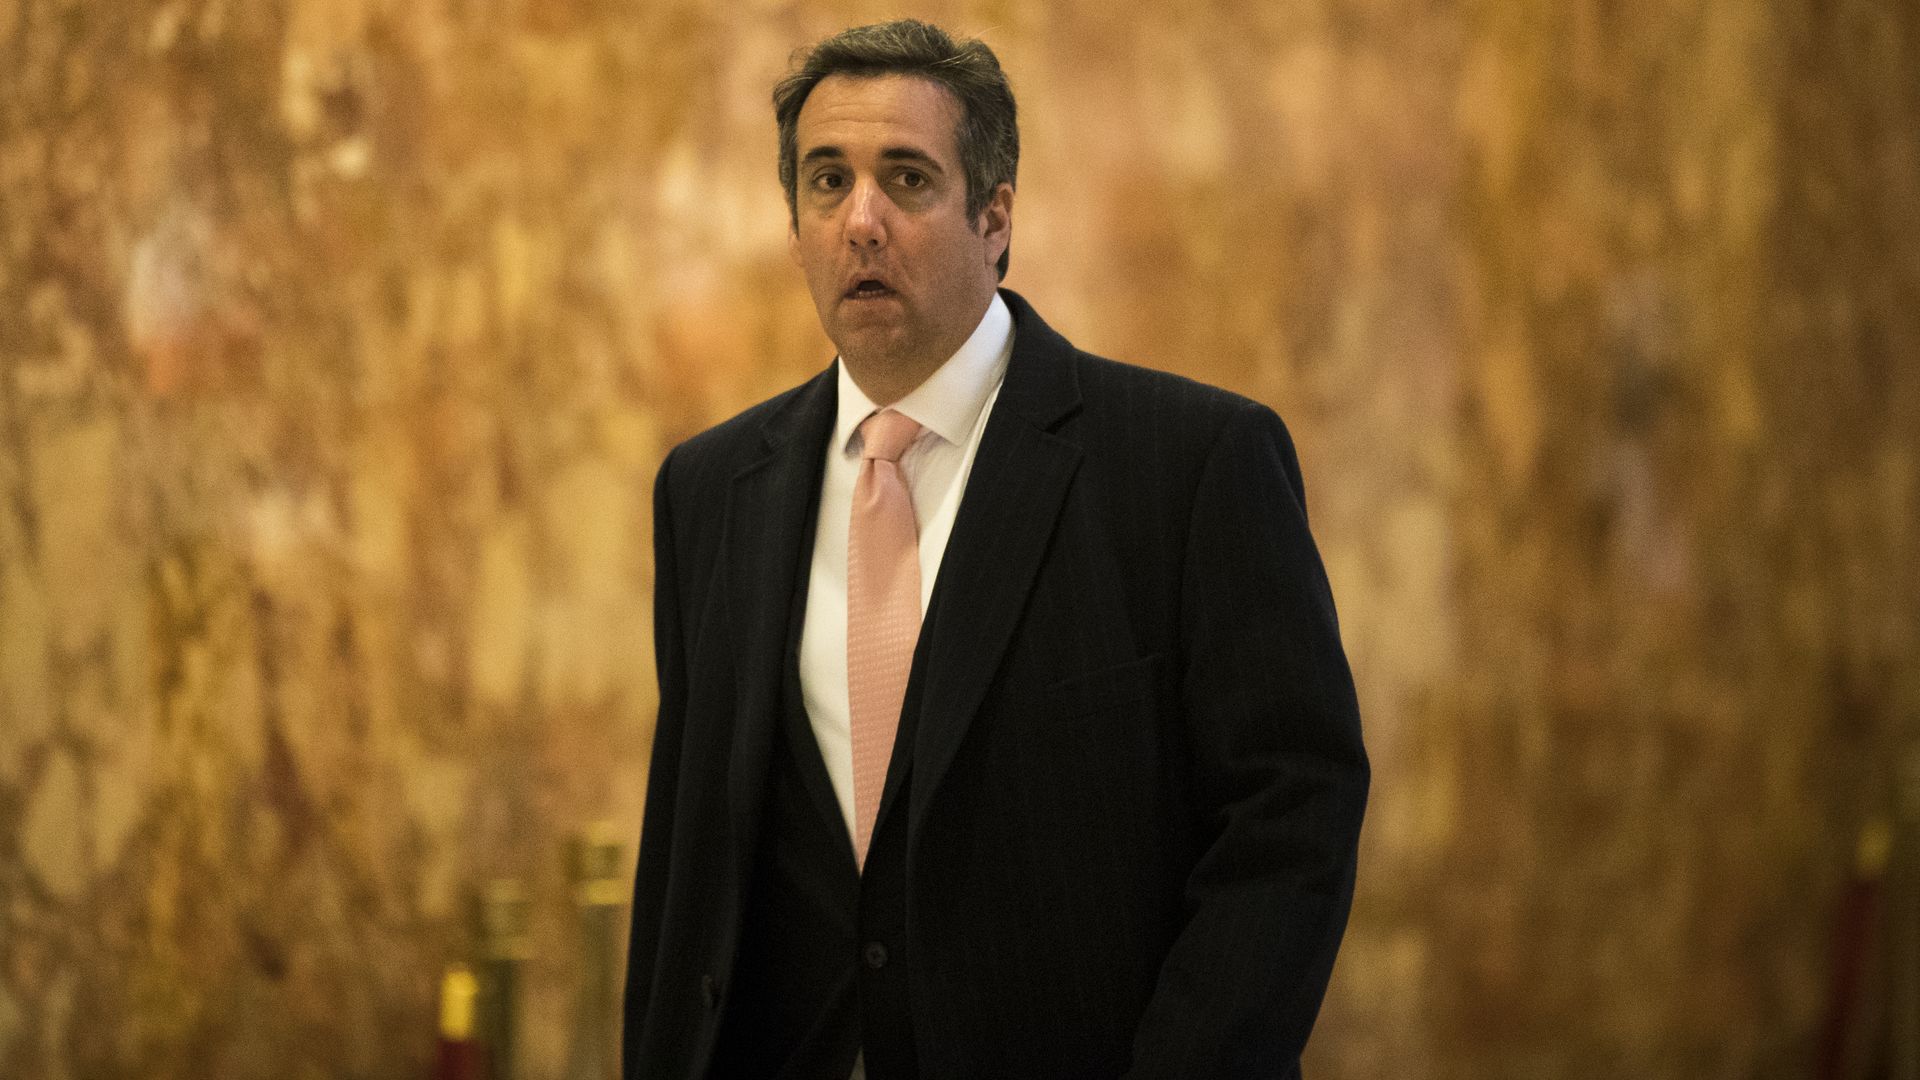 Trump lawyer Michael Cohen with his mouth agape